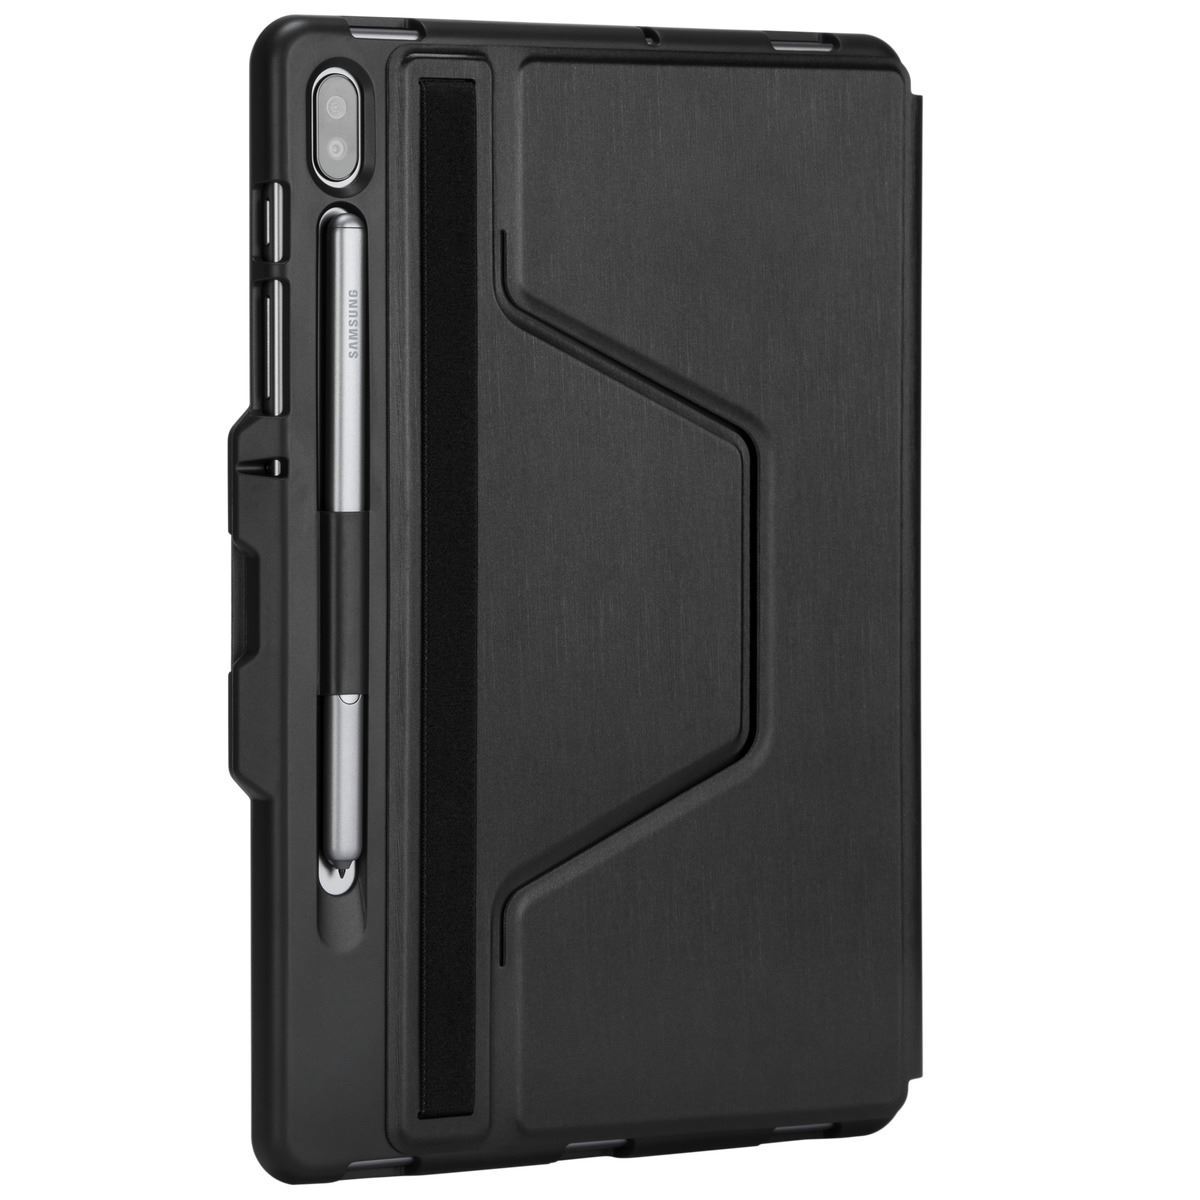 Uncle or Mister believe Specific Click-In case for Samsung Galaxy Tab S6 (2019) - Black